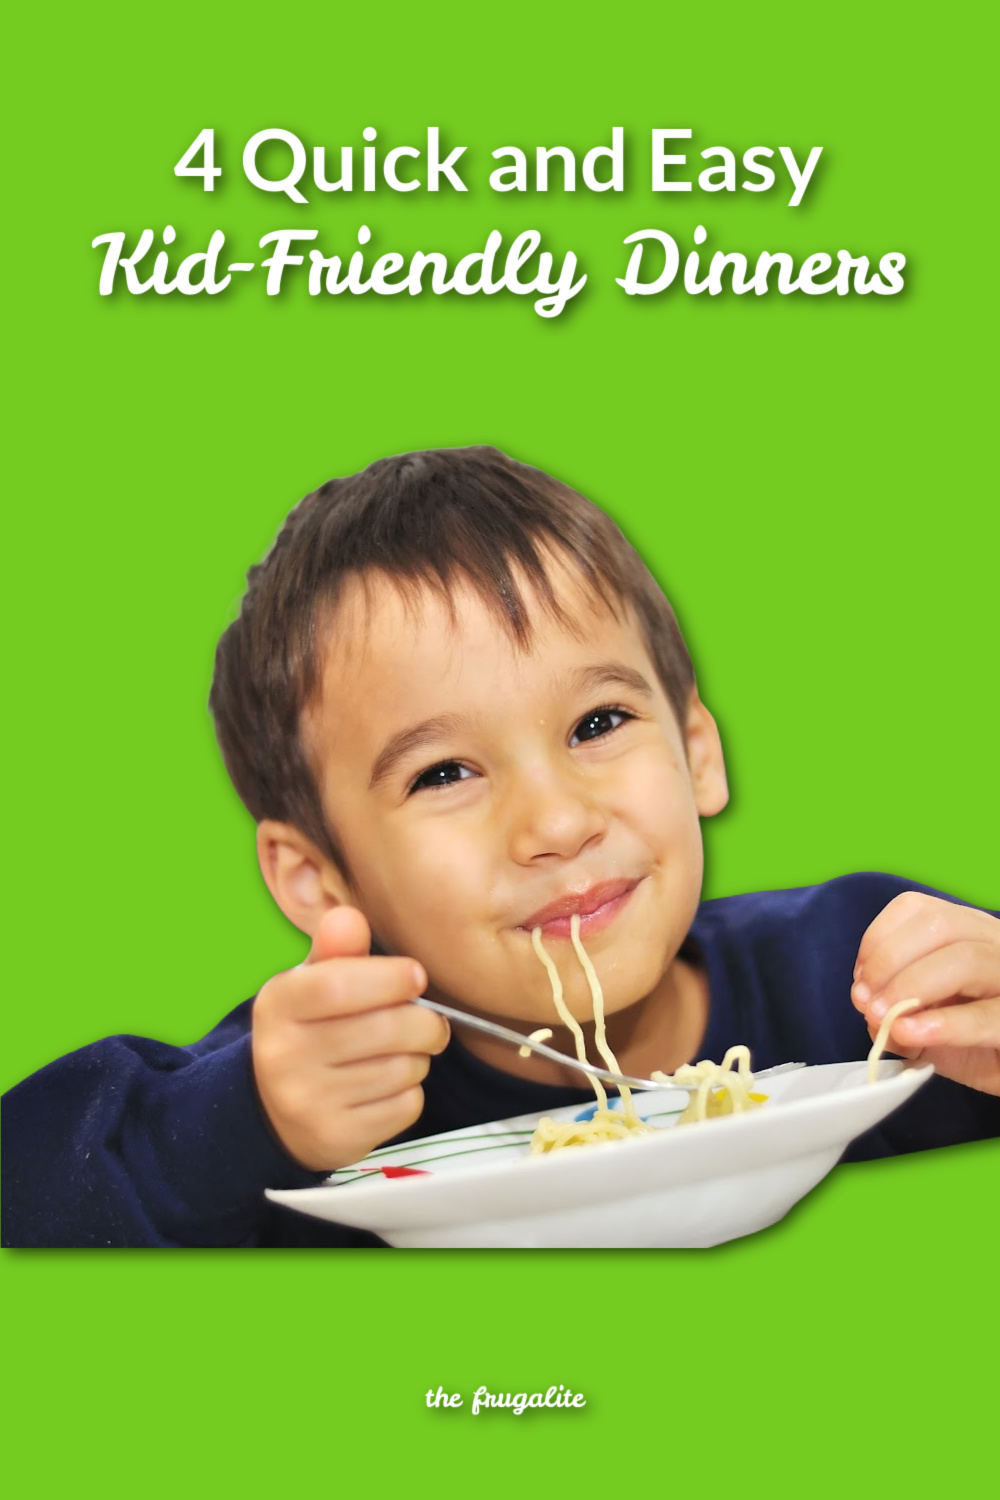 4 Quick and Easy Kid-Friendly Dinners